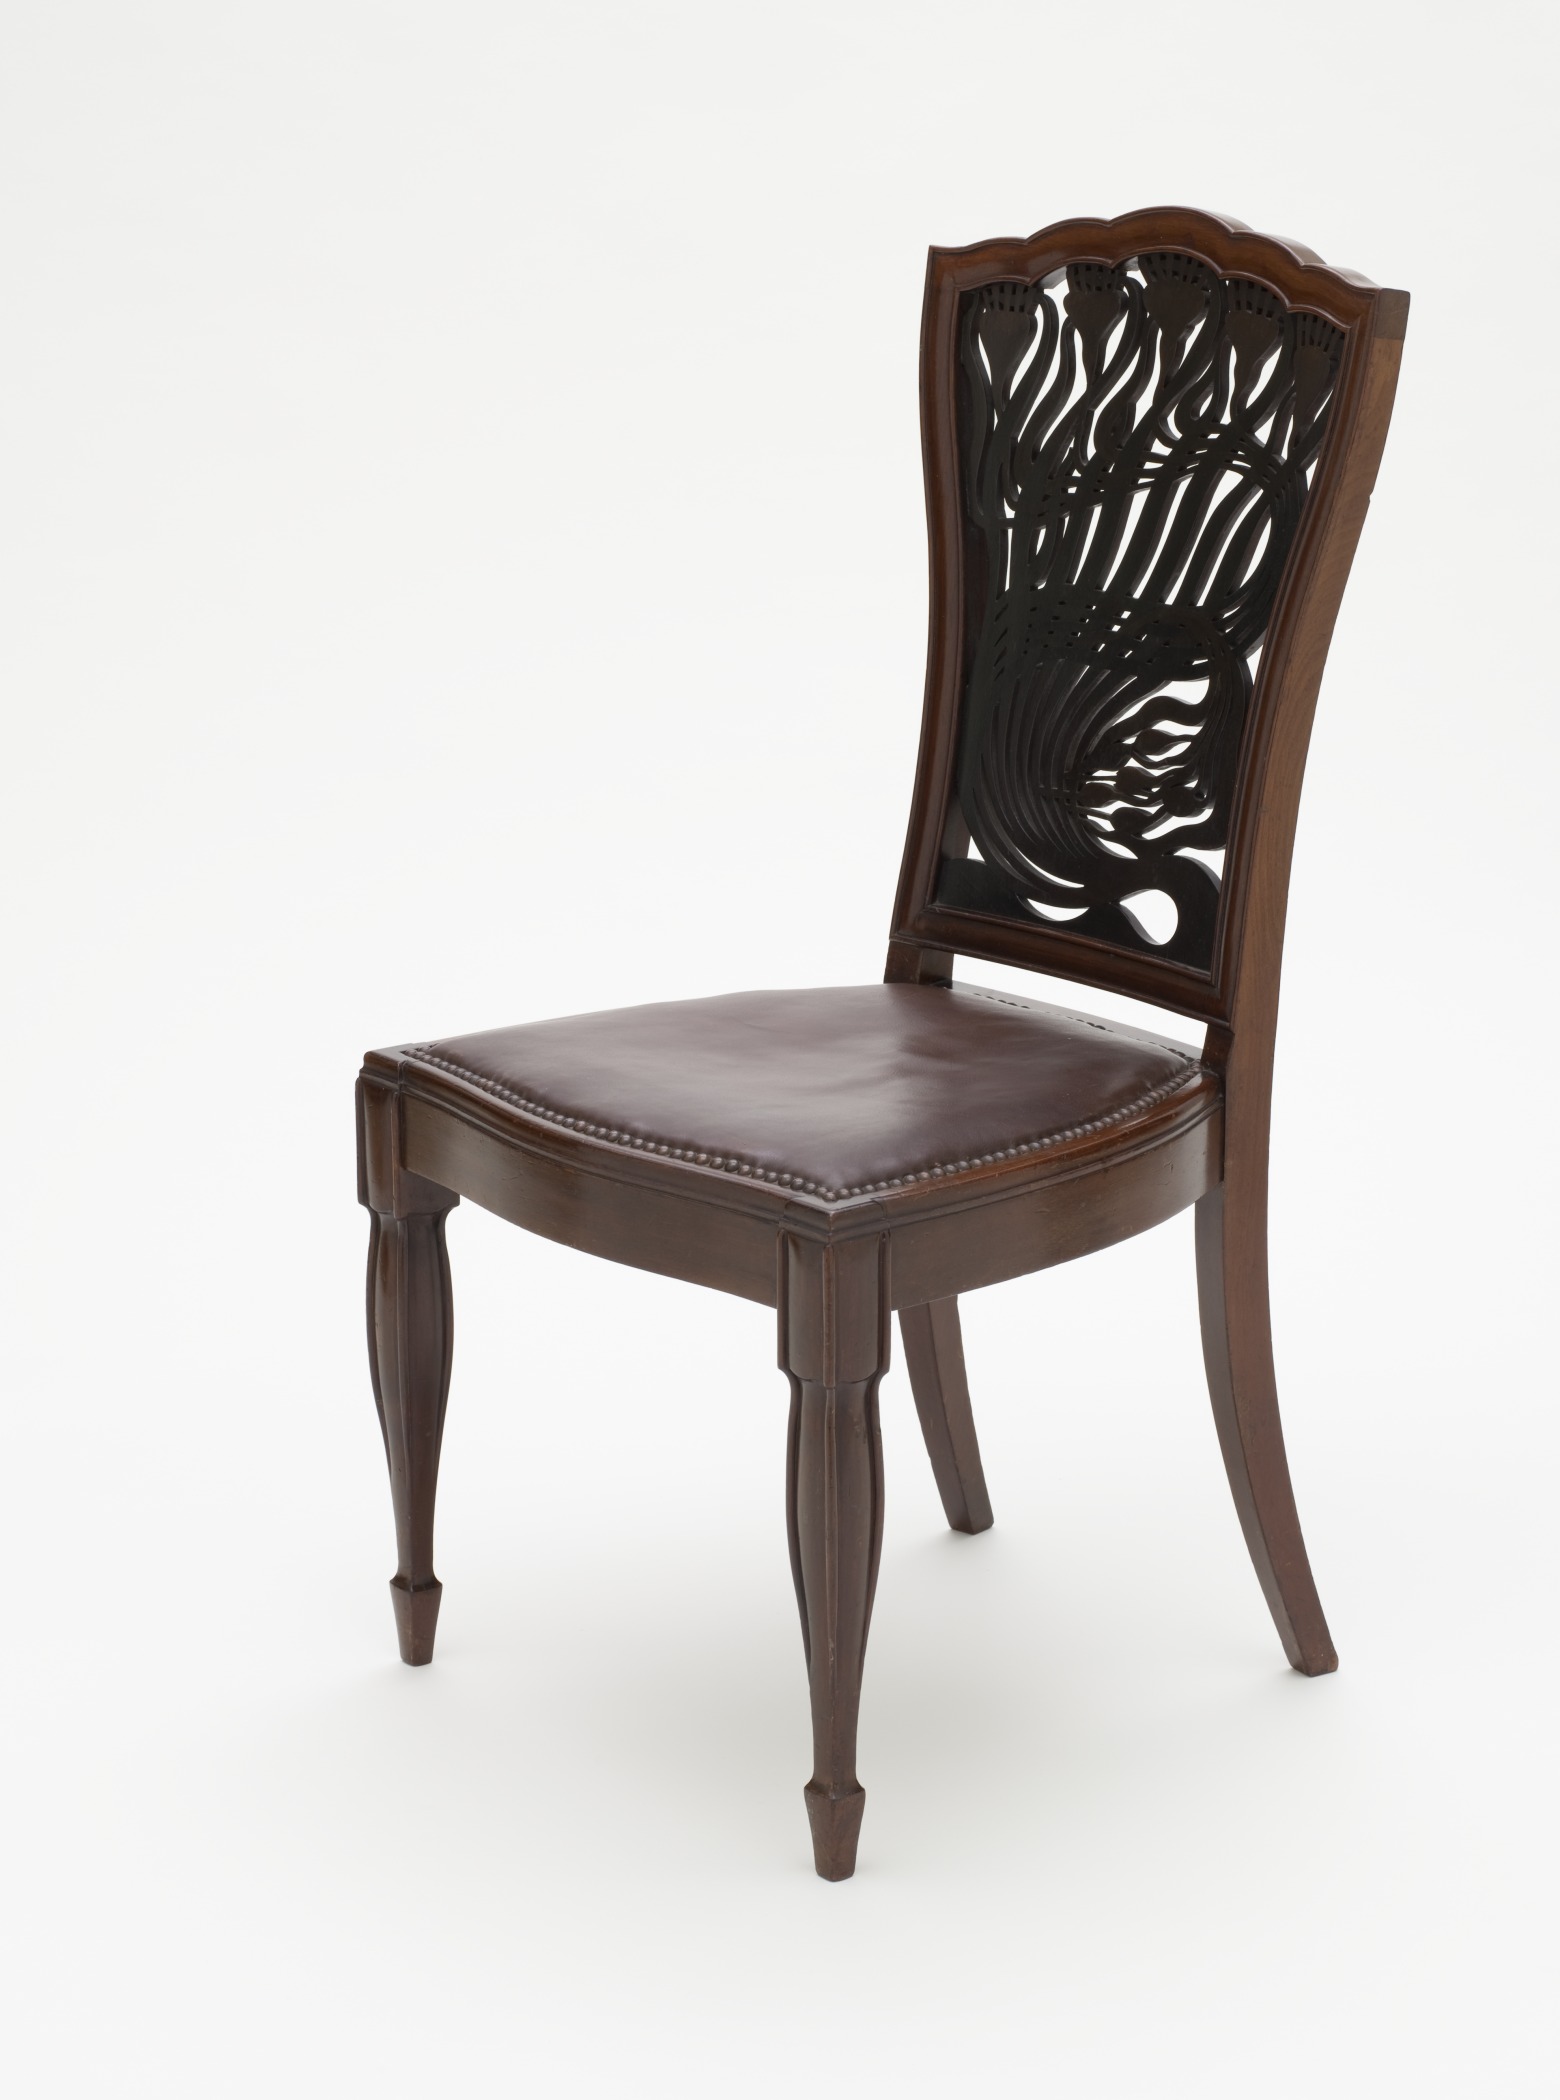 a dark colored chair with wooden legs and a leather seat